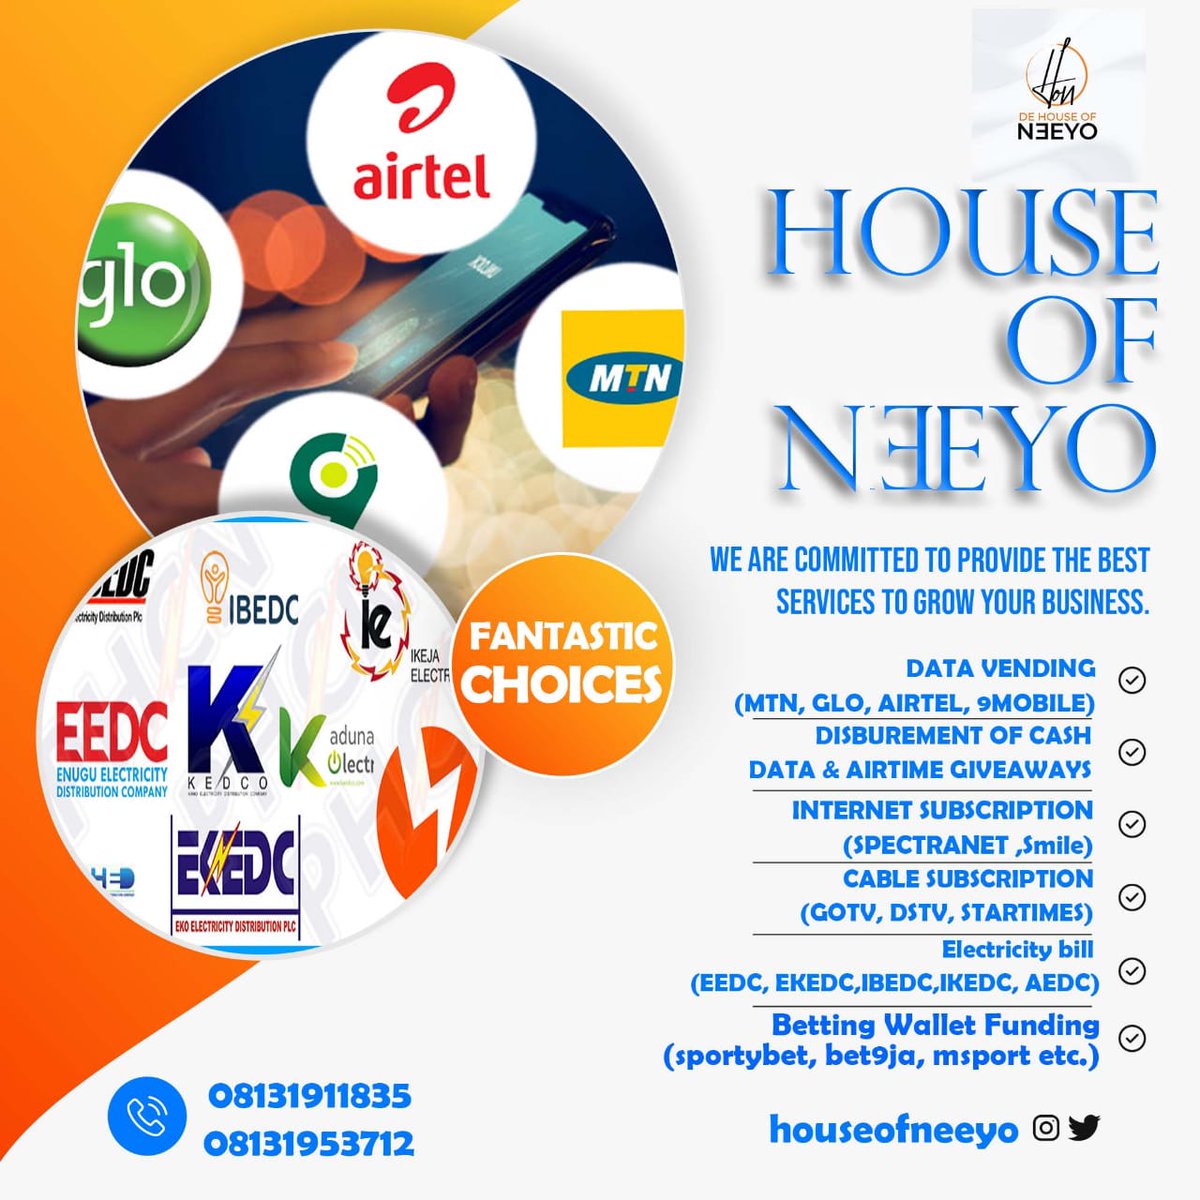 Her name is Oyindamola of @houseofneeyo She vends Data and help customers subscribe to their cable subscription and electricity payment. She also has a weekly, bi-weekly, monthly, and quarterly payment tab for your loved ones. Feel free to patronise her.